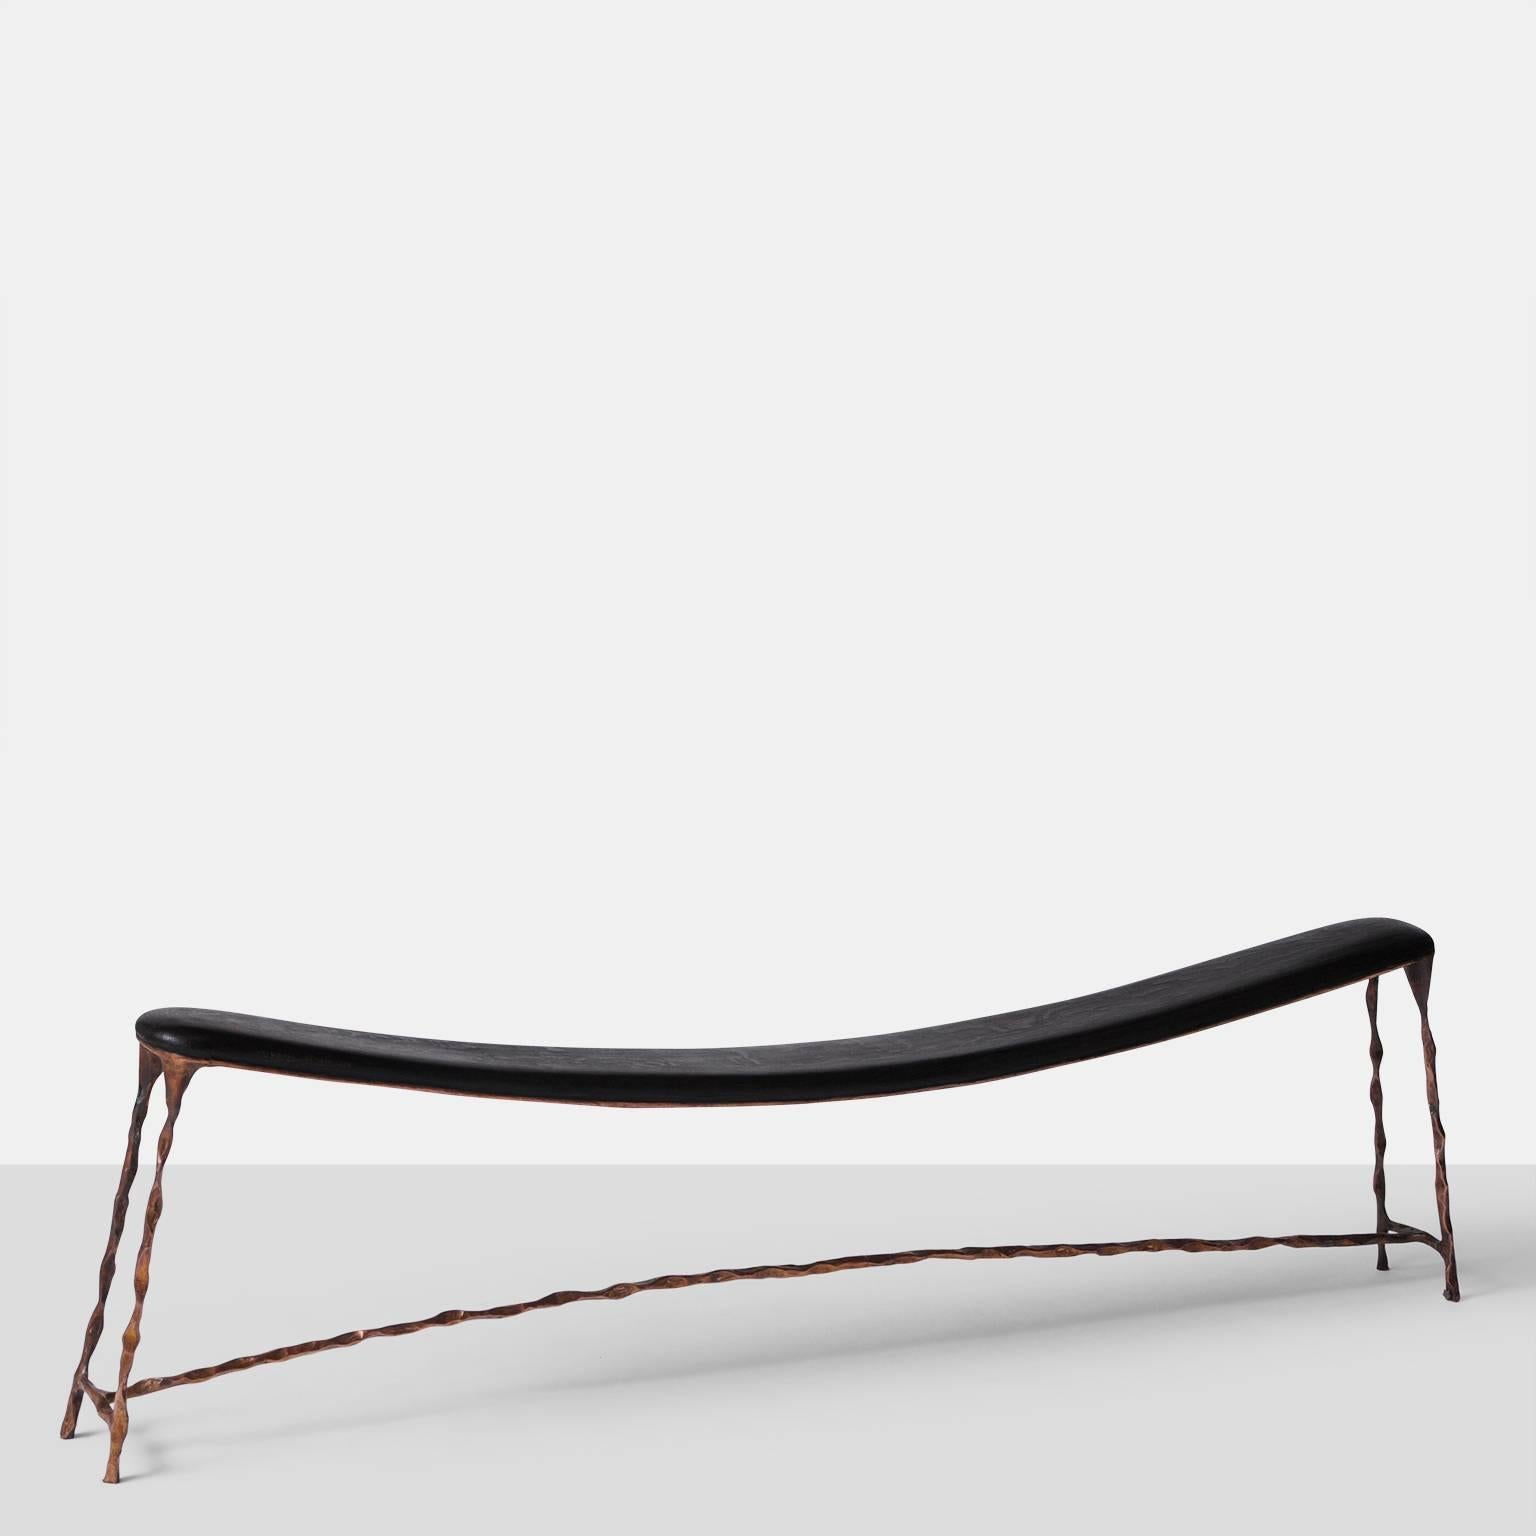 Organic Modern Large Bended Copper Bench by Valentin Loellmann